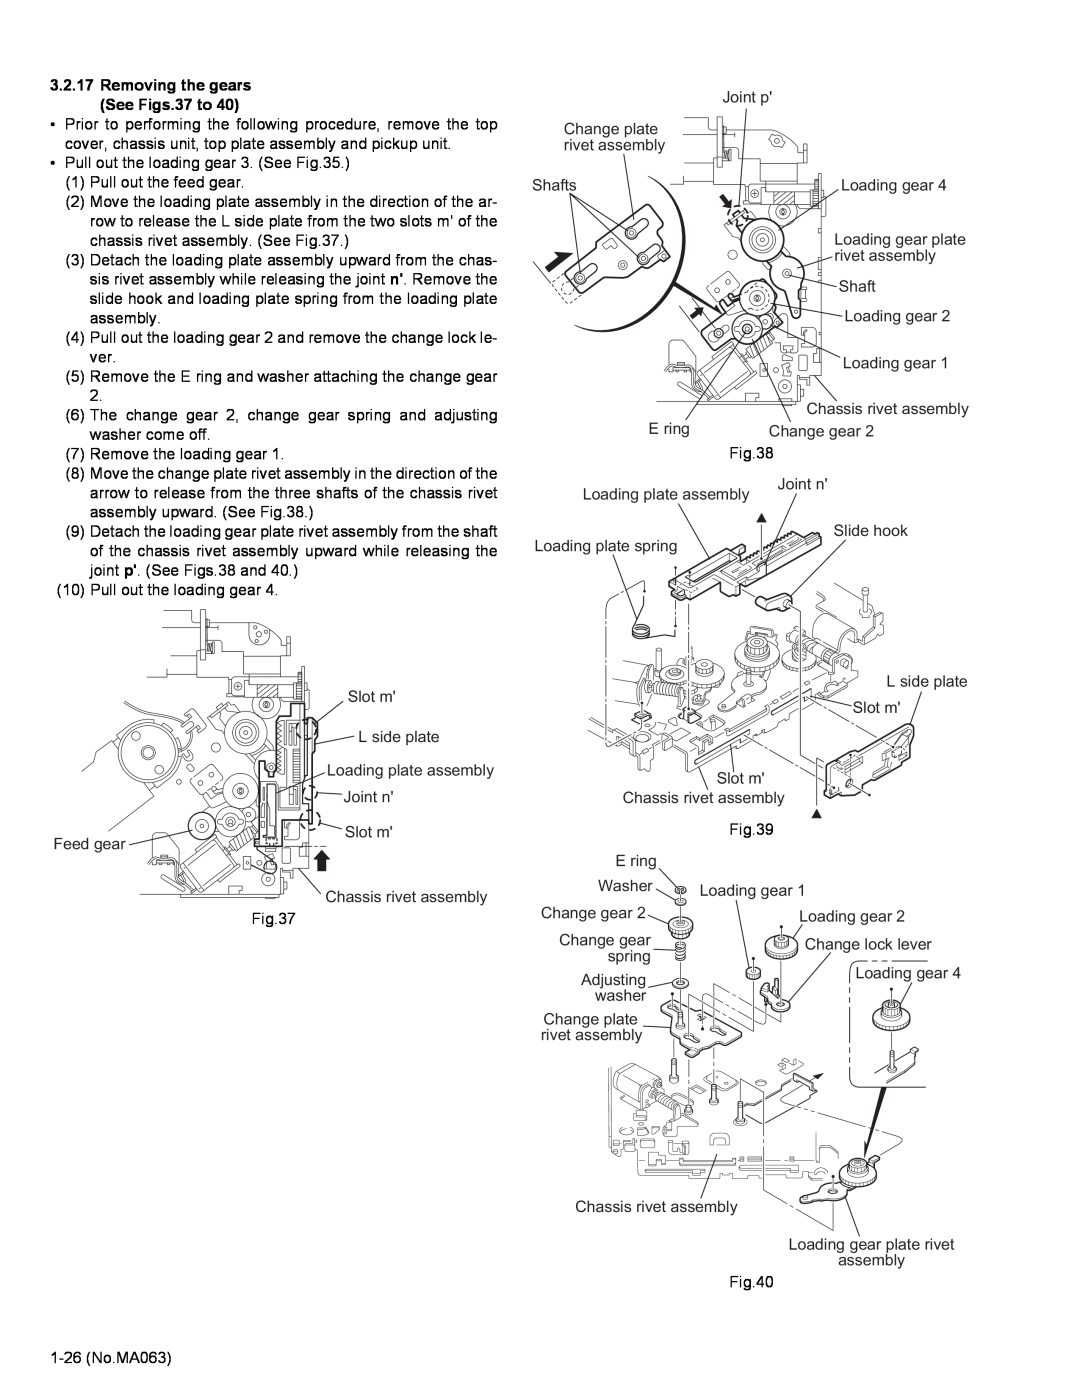 JVC KD-LH401 service manual Removing the gears See Figs.37 to 